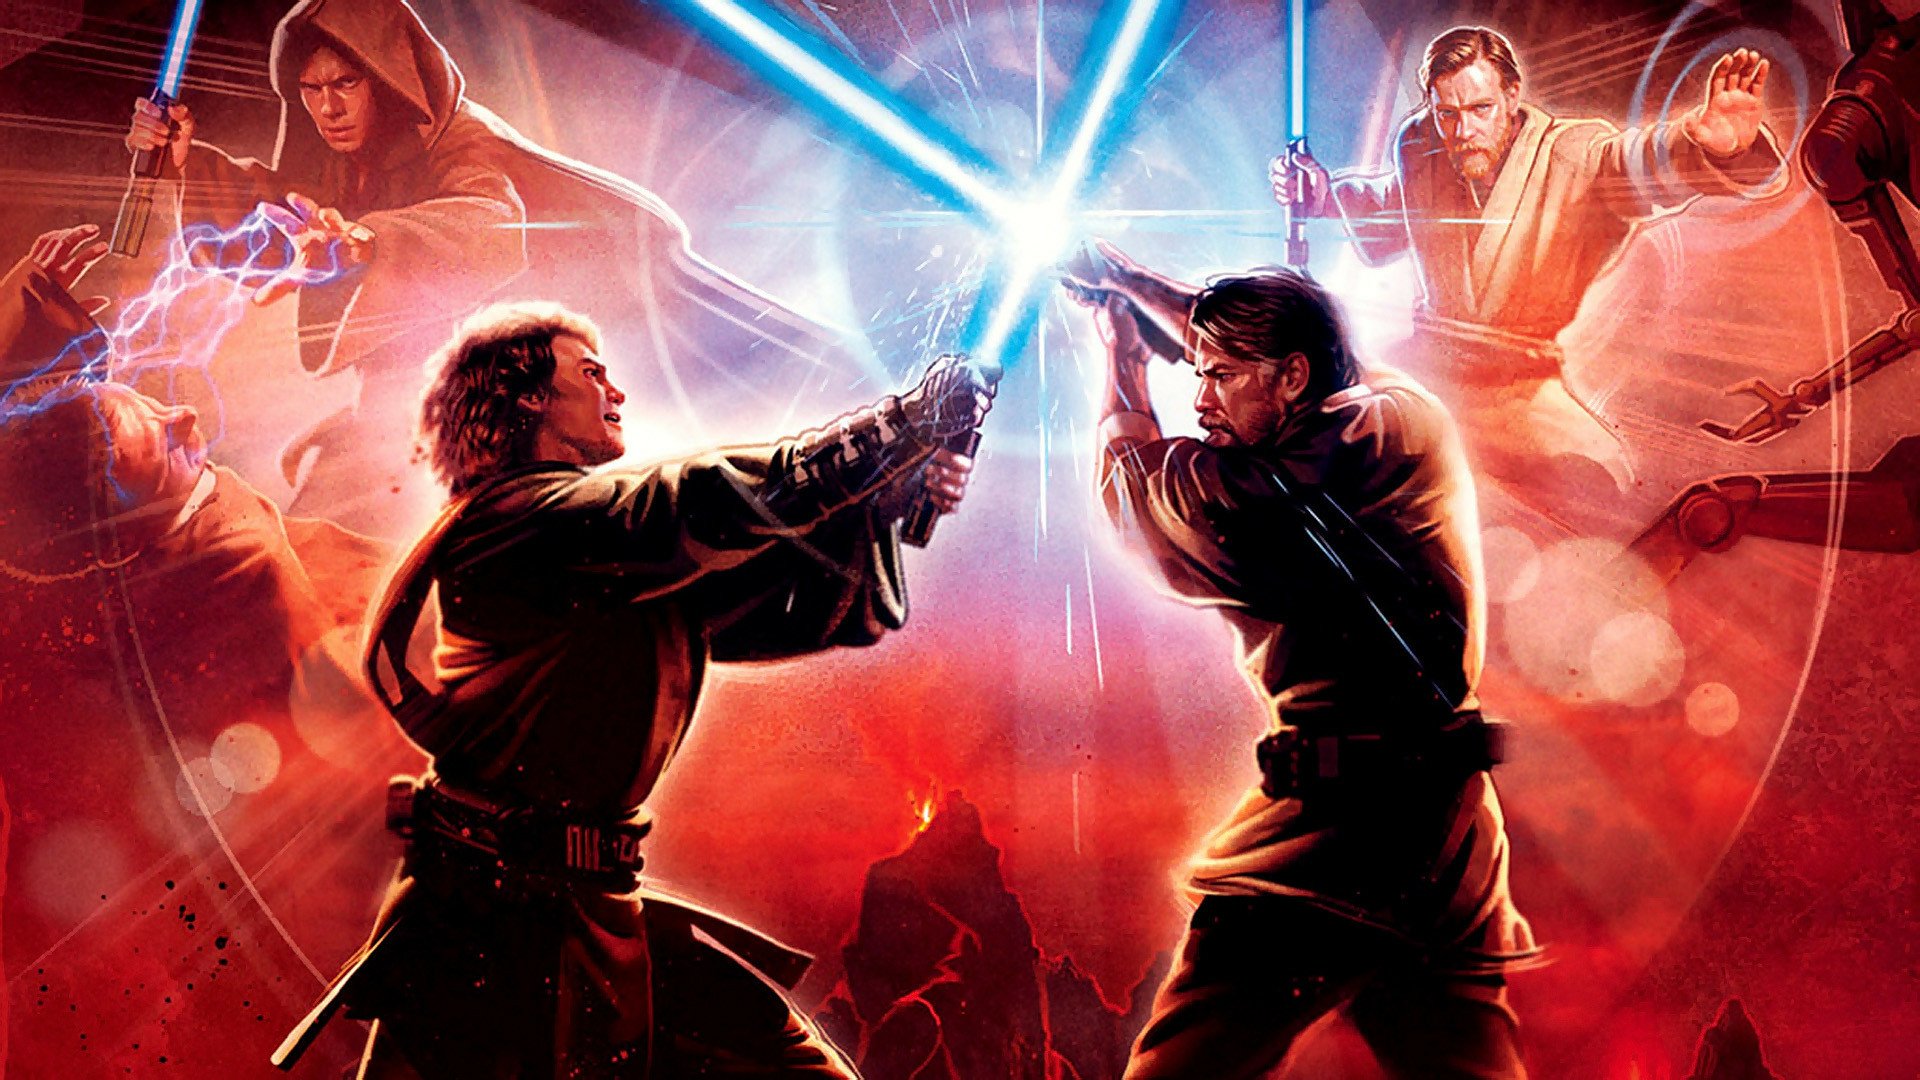 Star Wars Ep. III: Revenge of the Sith download the last version for ios